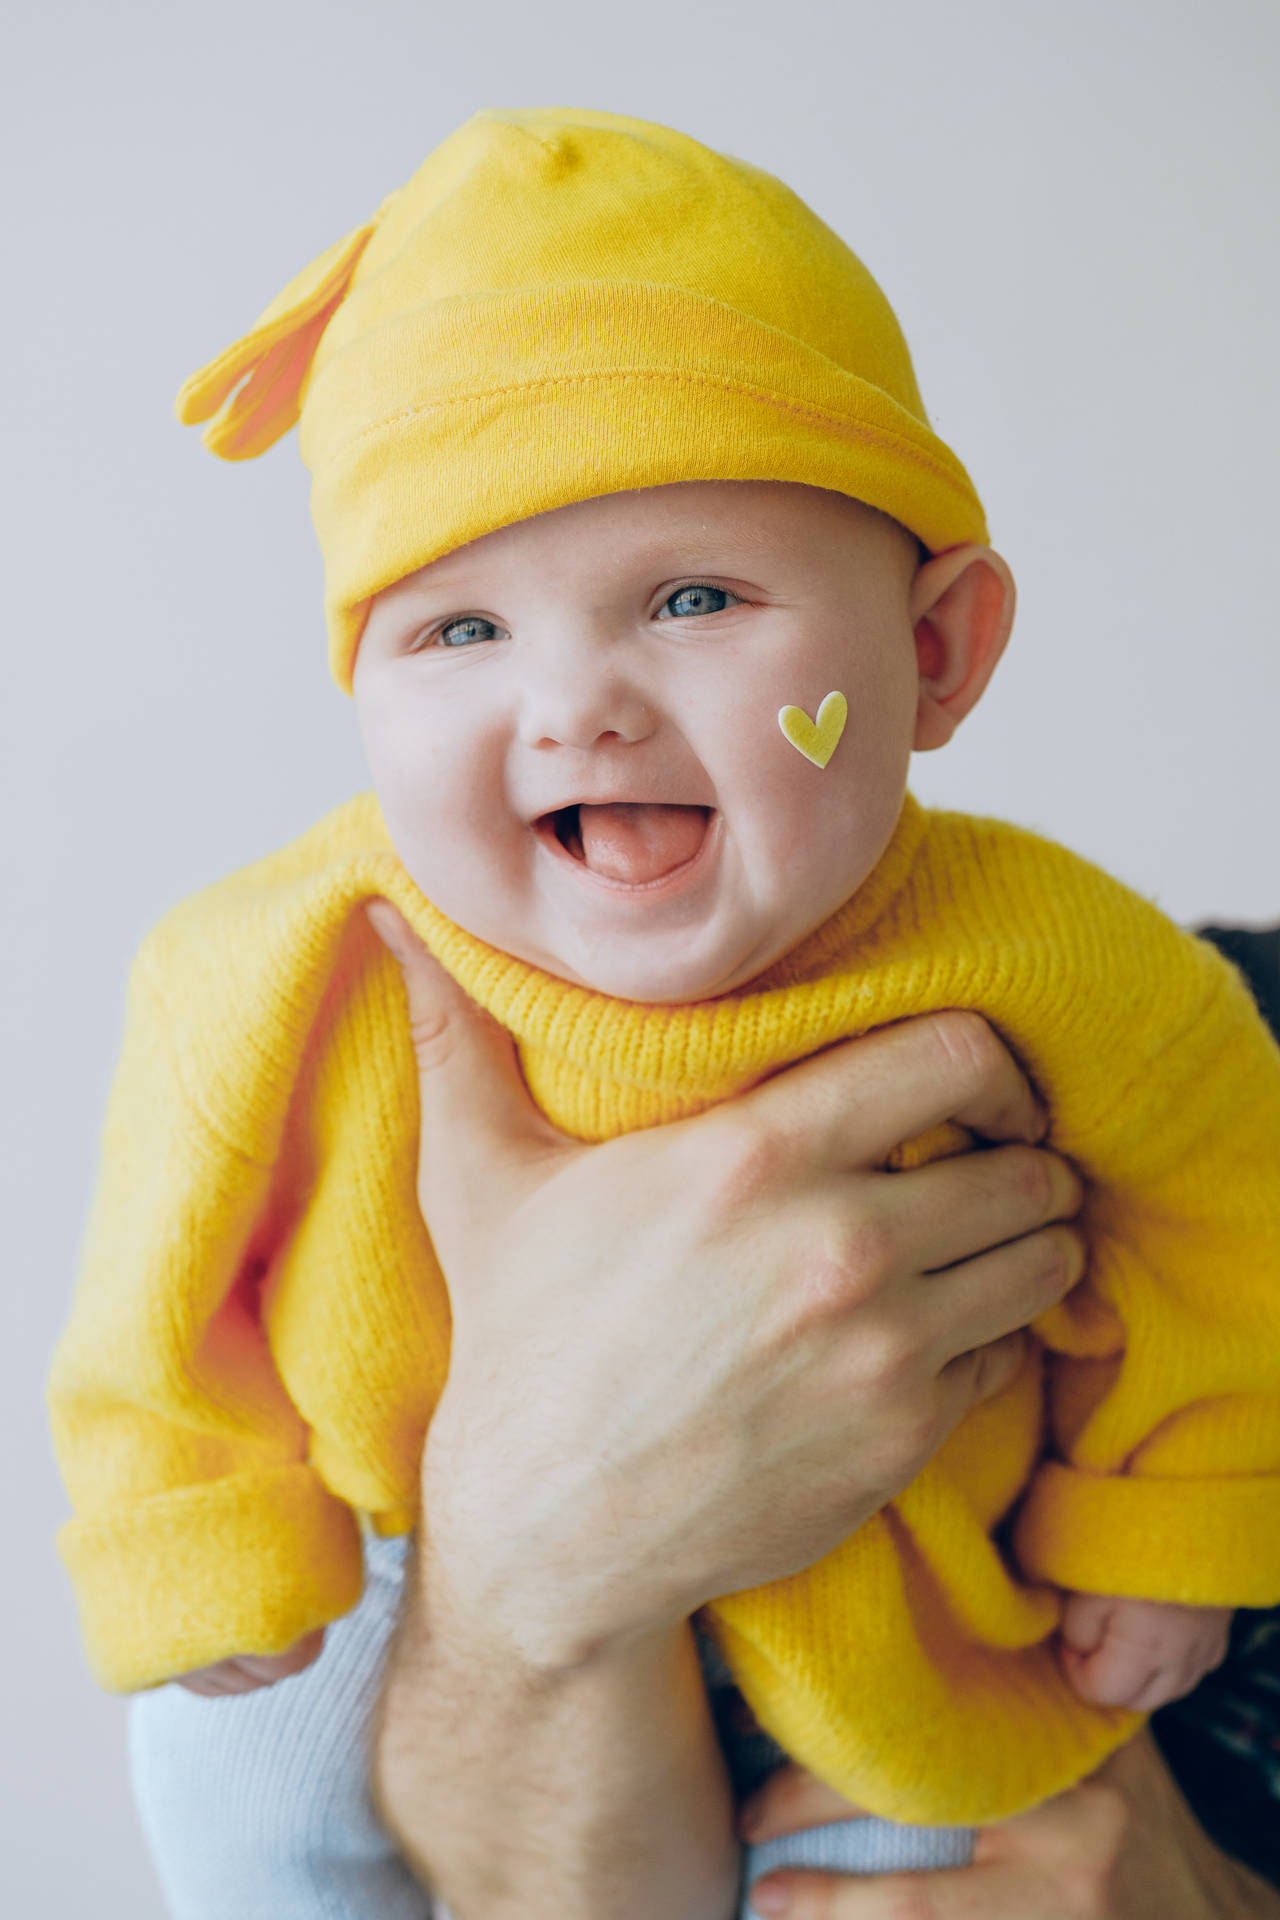 Smiling Baby Hd